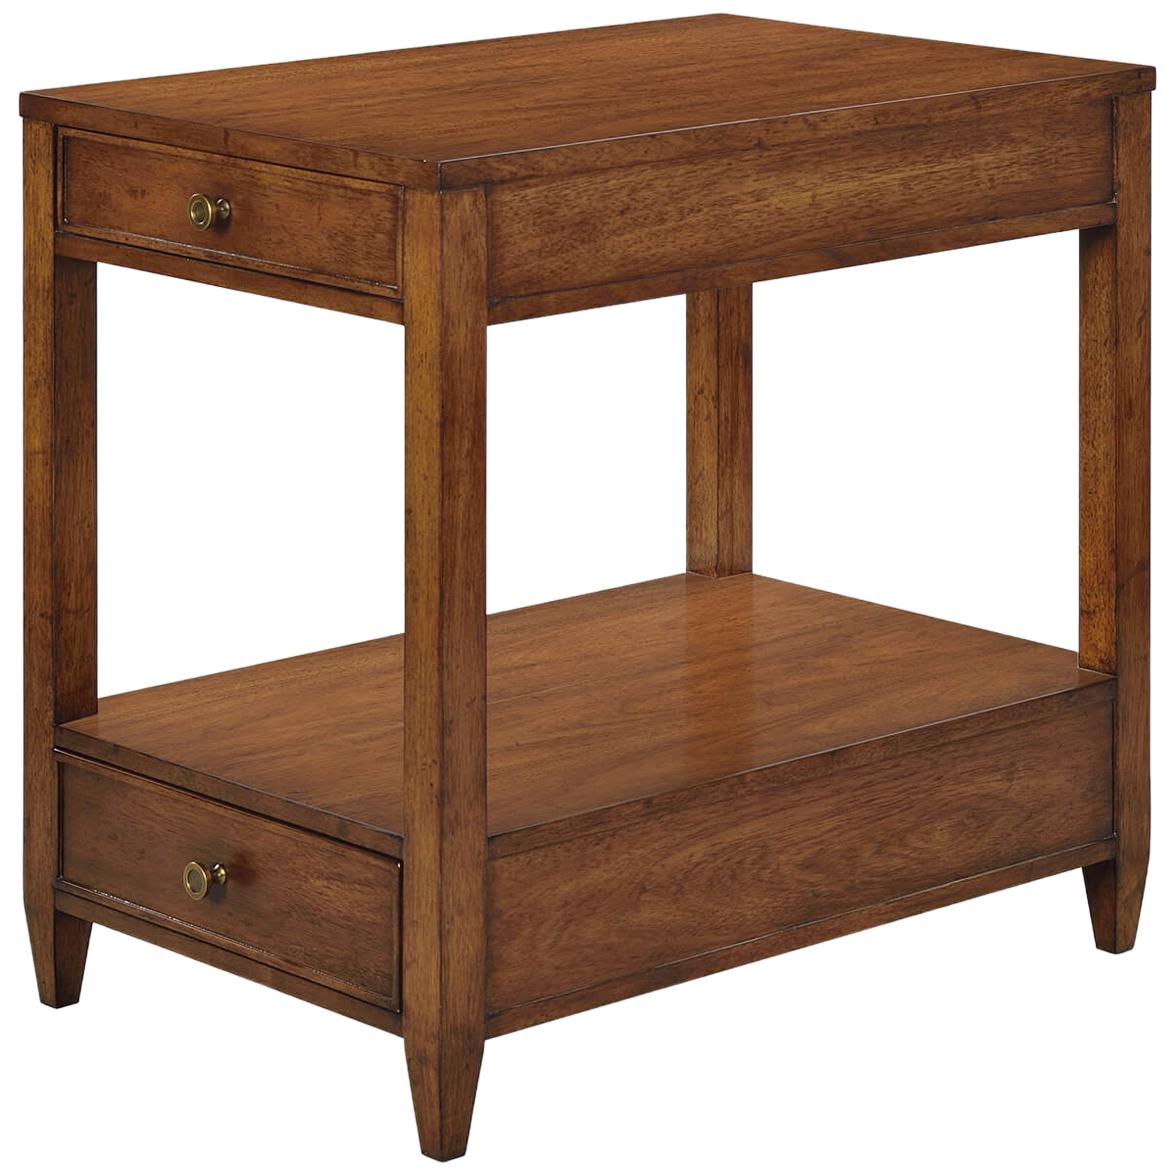 Classic Narrow Side Table For Sale